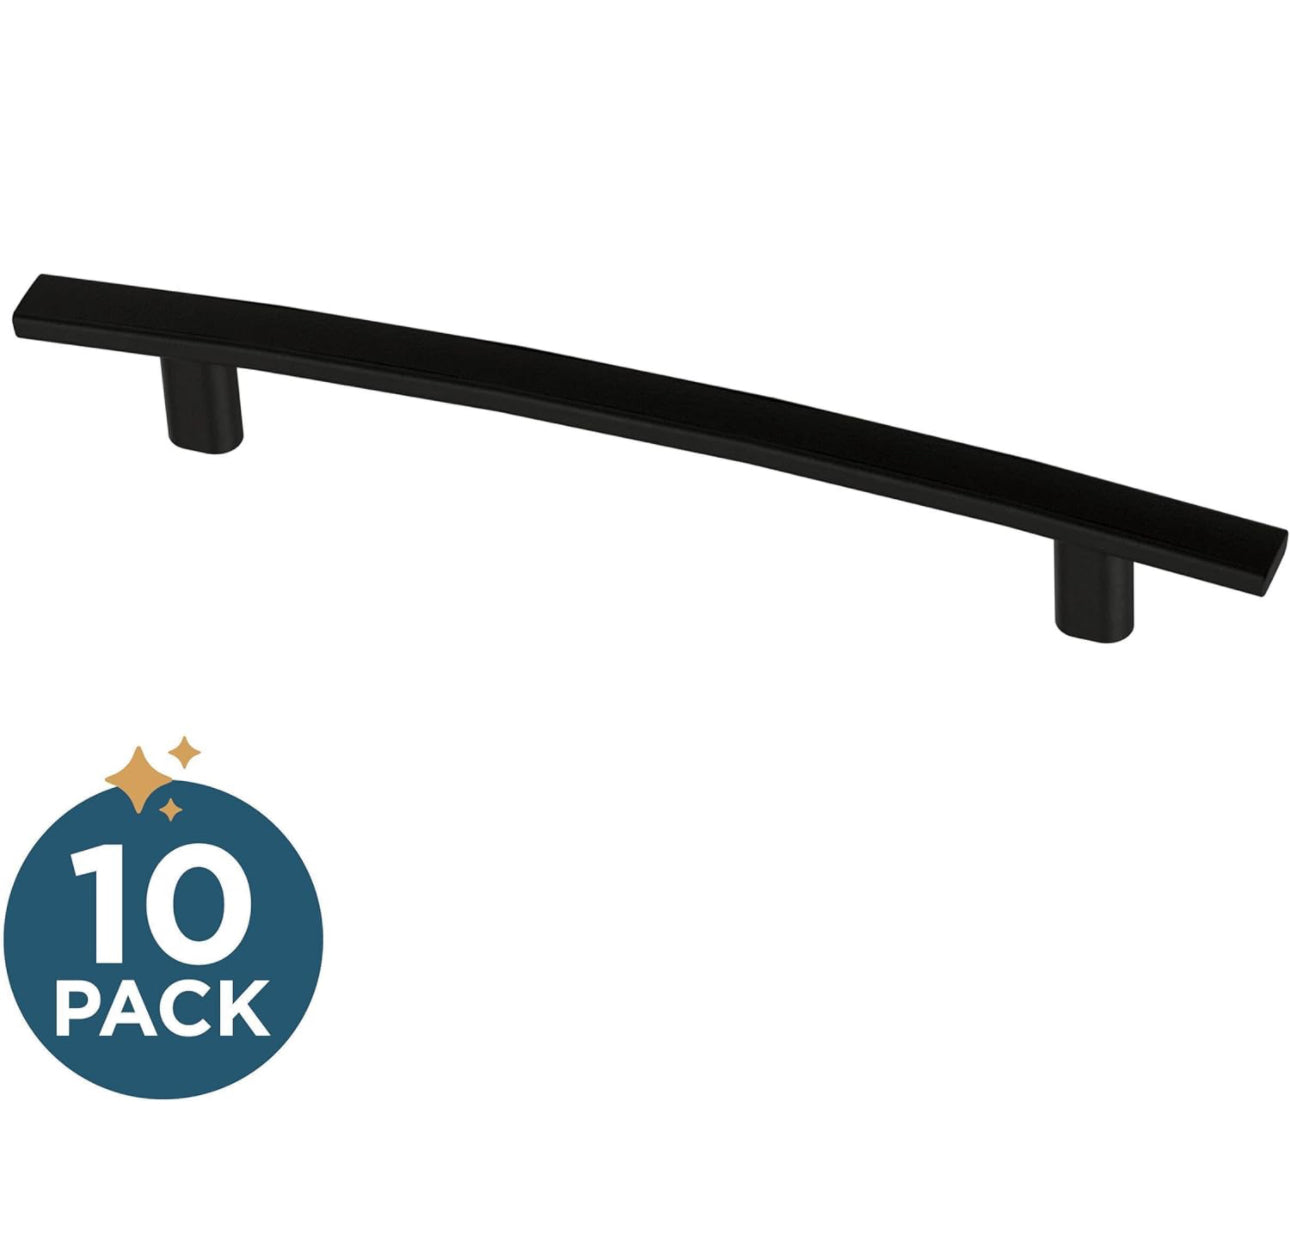 Franklin Brass Subtle Arch Cabinet Pull, Black, 5-1/16 in (128mm) Drawer Handle, 10 Pack, P44434-FB-B